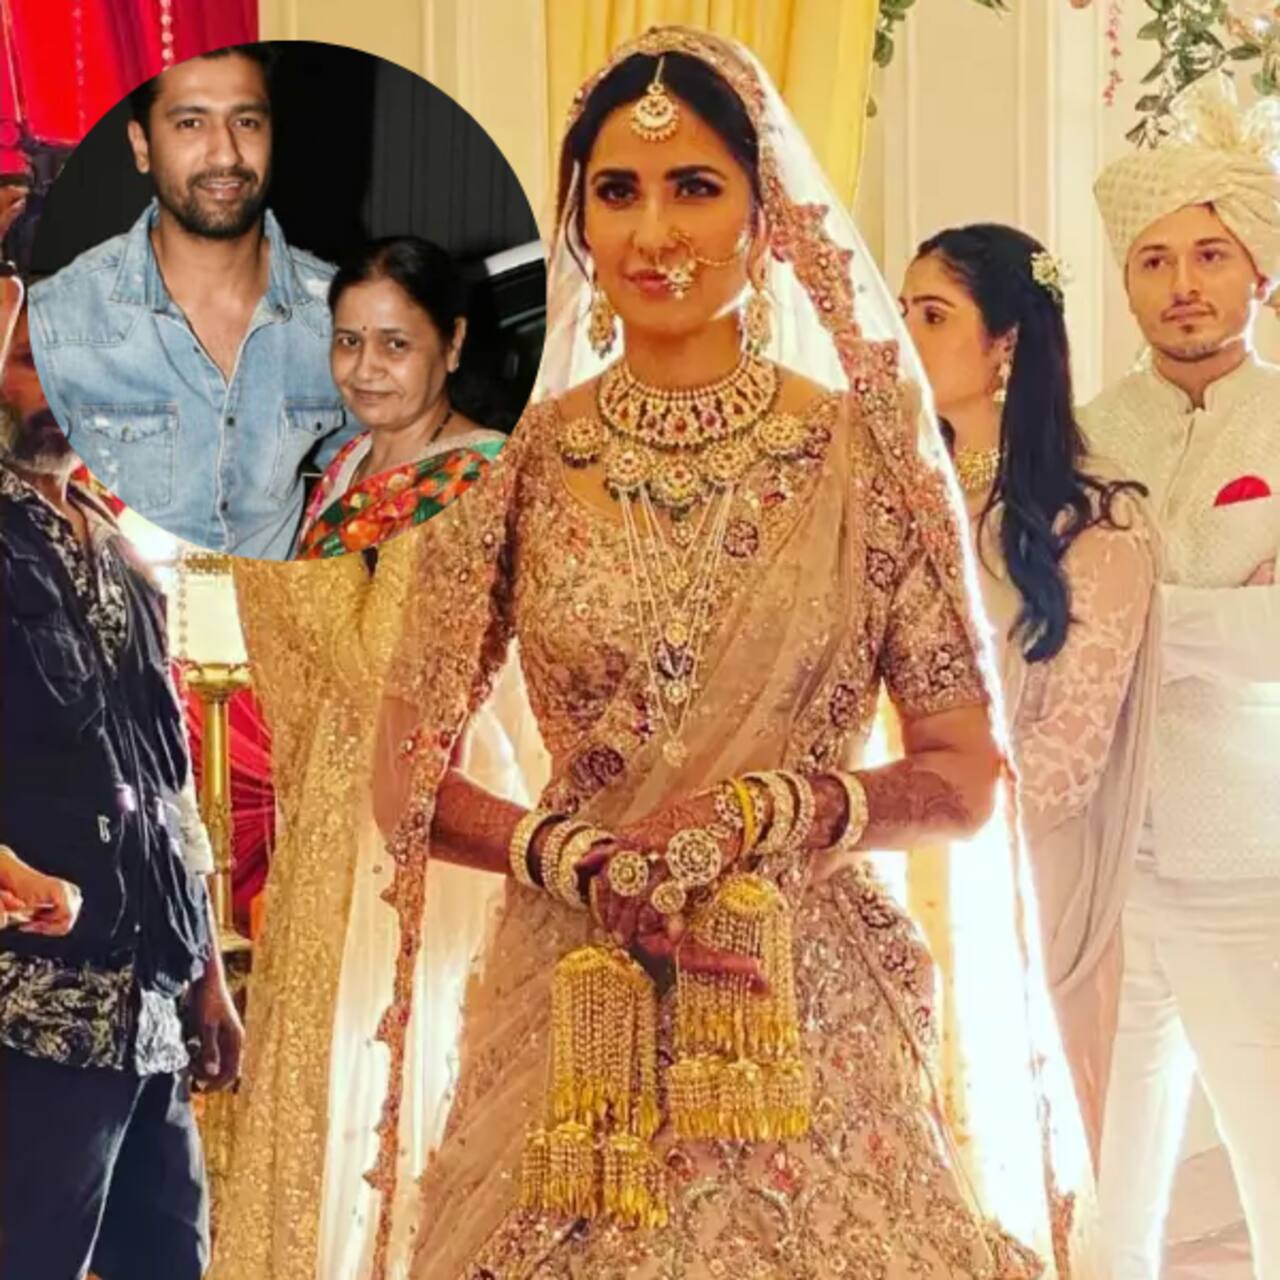 Vicky Kaushal – Katrina Kaif’s Wedding Sangeet: Groom’s mother Veena’s special gesture for bahu [Exclusive]